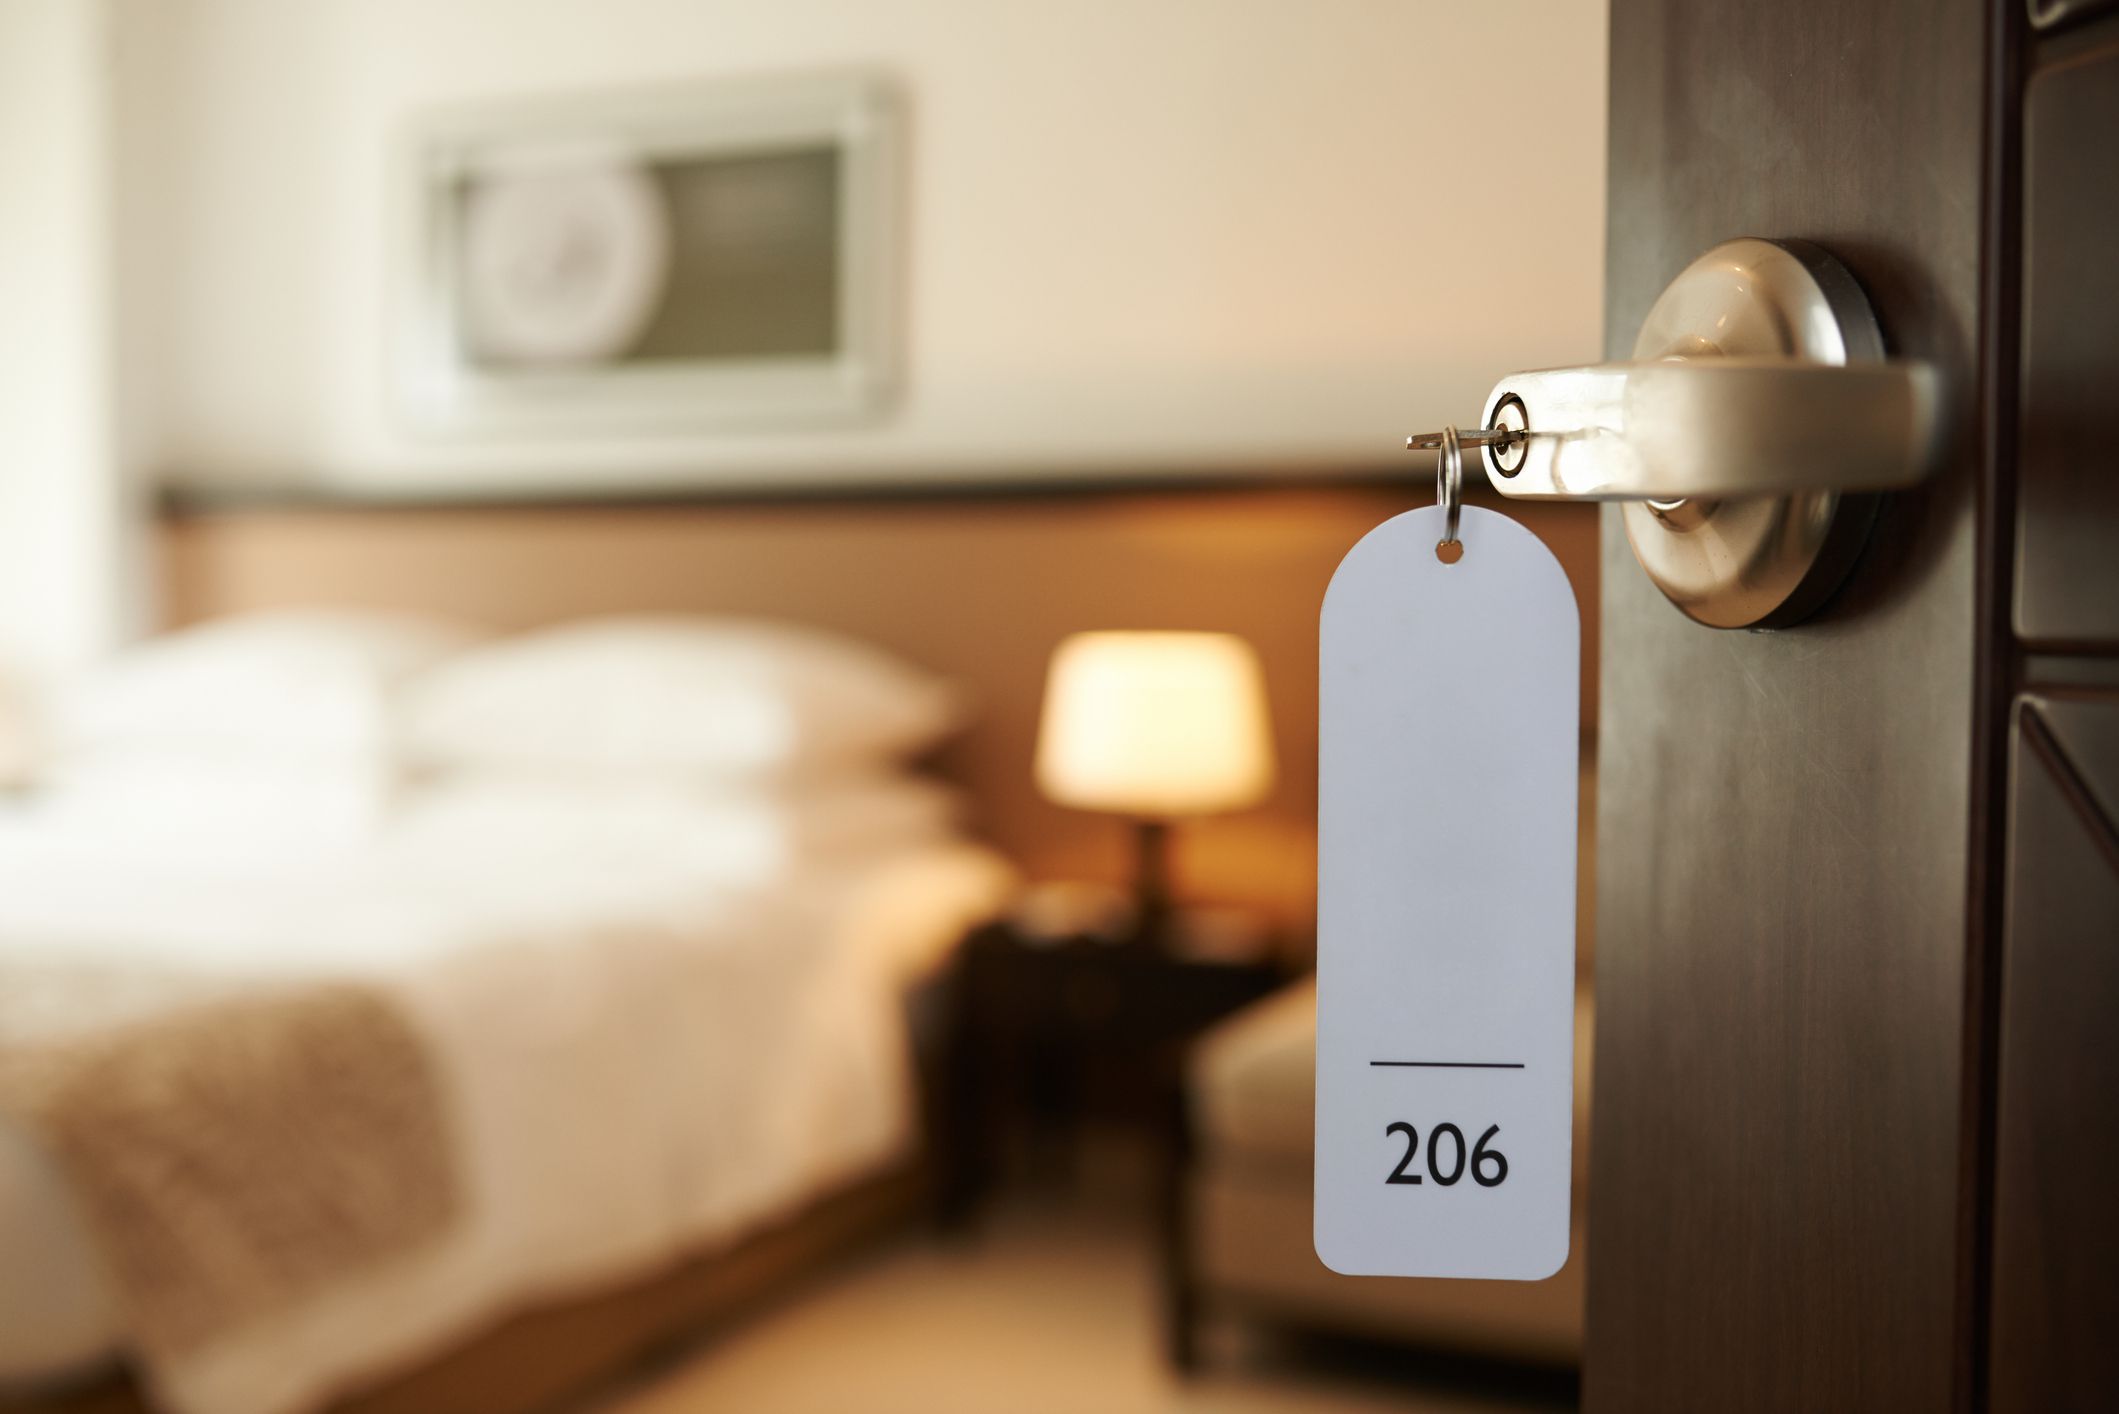 <p>It’s not just loyalty or elite members who’ll get recognized by hotel staff, hyper-personalization is set to be the trend moving forward, according to the hospitality-tech company <a href="https://www.mews.com/en/blog/hotel-trends-hospitality-industry">Mews</a>, where everything from marketing mailers, personal offers, the in-room experience or pillow menu will be adjusted to individual guests preferences so everyone feels like a VIP. What’s helping grow this trend is the growing popularity and use of voice-enabled AI devices like Alexa that can be programmed to do everything from supplying personal music/podcast playlists and controlling room devices to making calls on your behalf. </p>